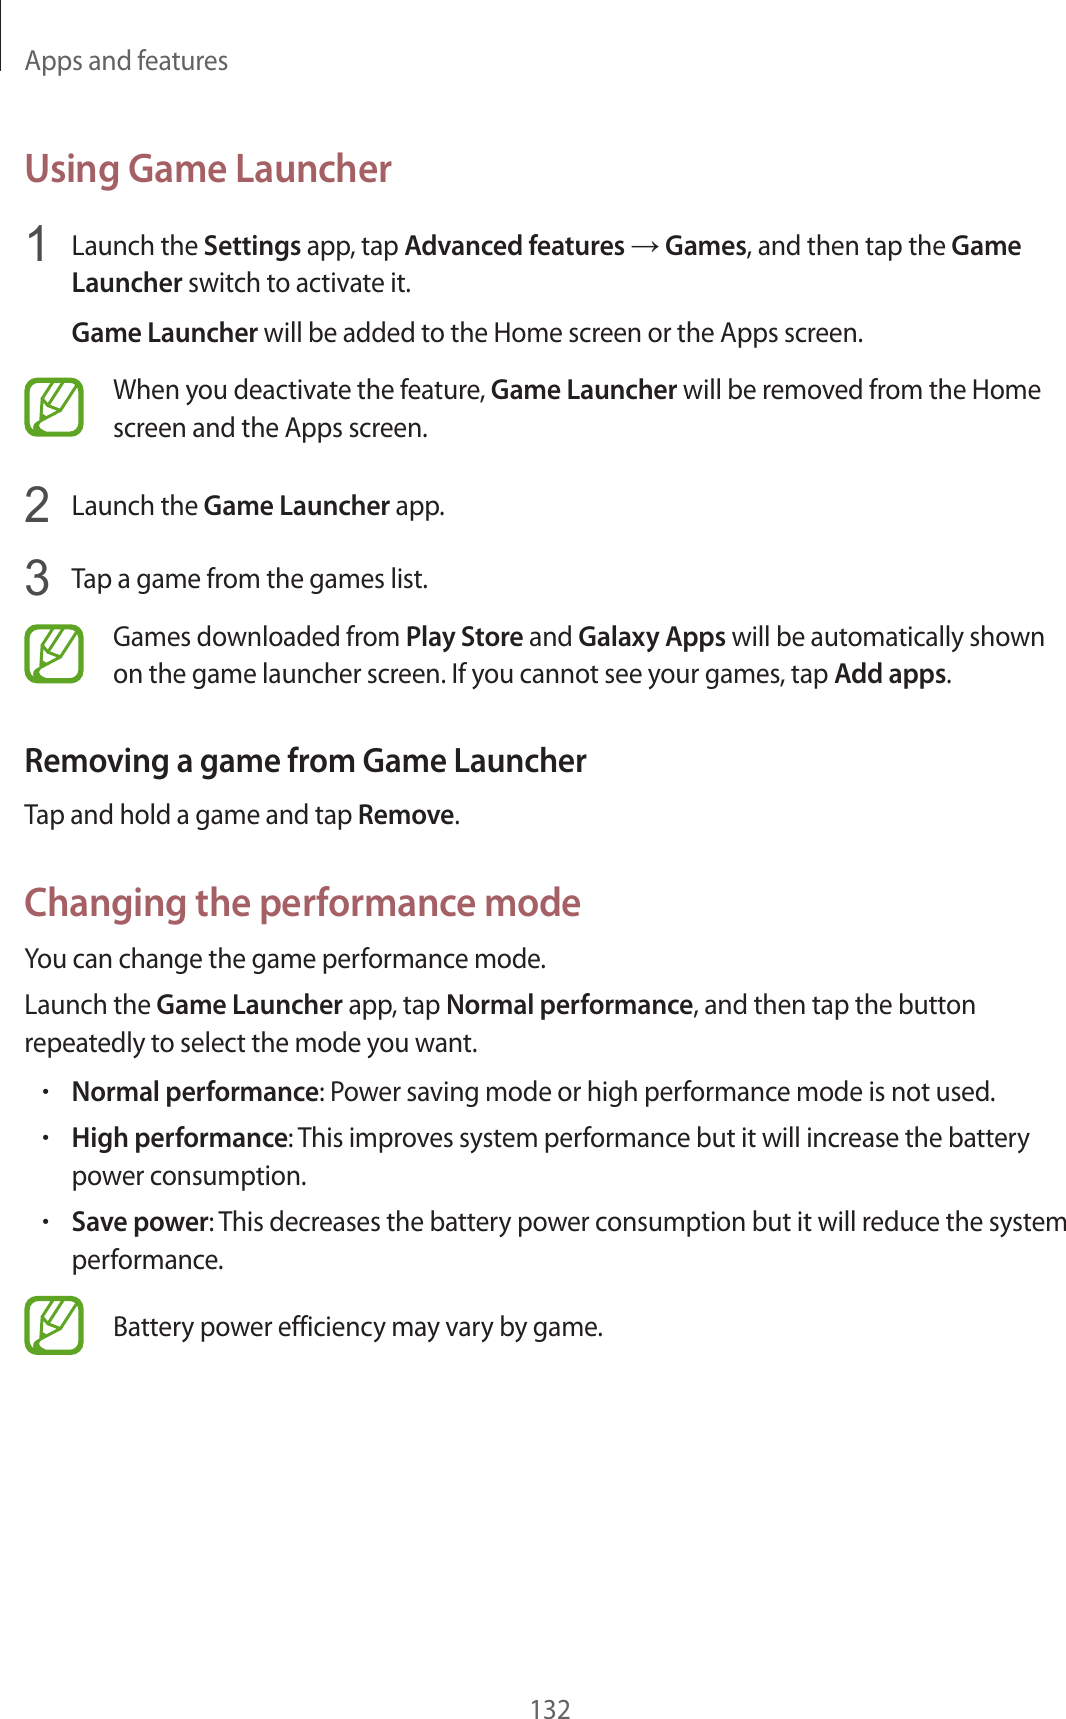 Apps and features132Using Game Launcher1  Launch the Settings app, tap Advanced features → Games, and then tap the Game Launcher switch to activate it.Game Launcher will be added to the Home screen or the Apps screen.When you deactivate the feature, Game Launcher will be removed from the Home screen and the Apps screen.2  Launch the Game Launcher app.3  Tap a game from the games list.Games downloaded from Play Store and Galaxy Apps will be automatically shown on the game launcher screen. If you cannot see your games, tap Add apps.Removing a game from Game LauncherTap and hold a game and tap Remove.Changing the performance modeYou can change the game performance mode.Launch the Game Launcher app, tap Normal performance, and then tap the button repeatedly to select the mode you want.•Normal performance: Power saving mode or high performance mode is not used.•High performance: This improves system performance but it will increase the battery power consumption.•Save power: This decreases the battery power consumption but it will reduce the system performance.Battery power efficiency may vary by game.